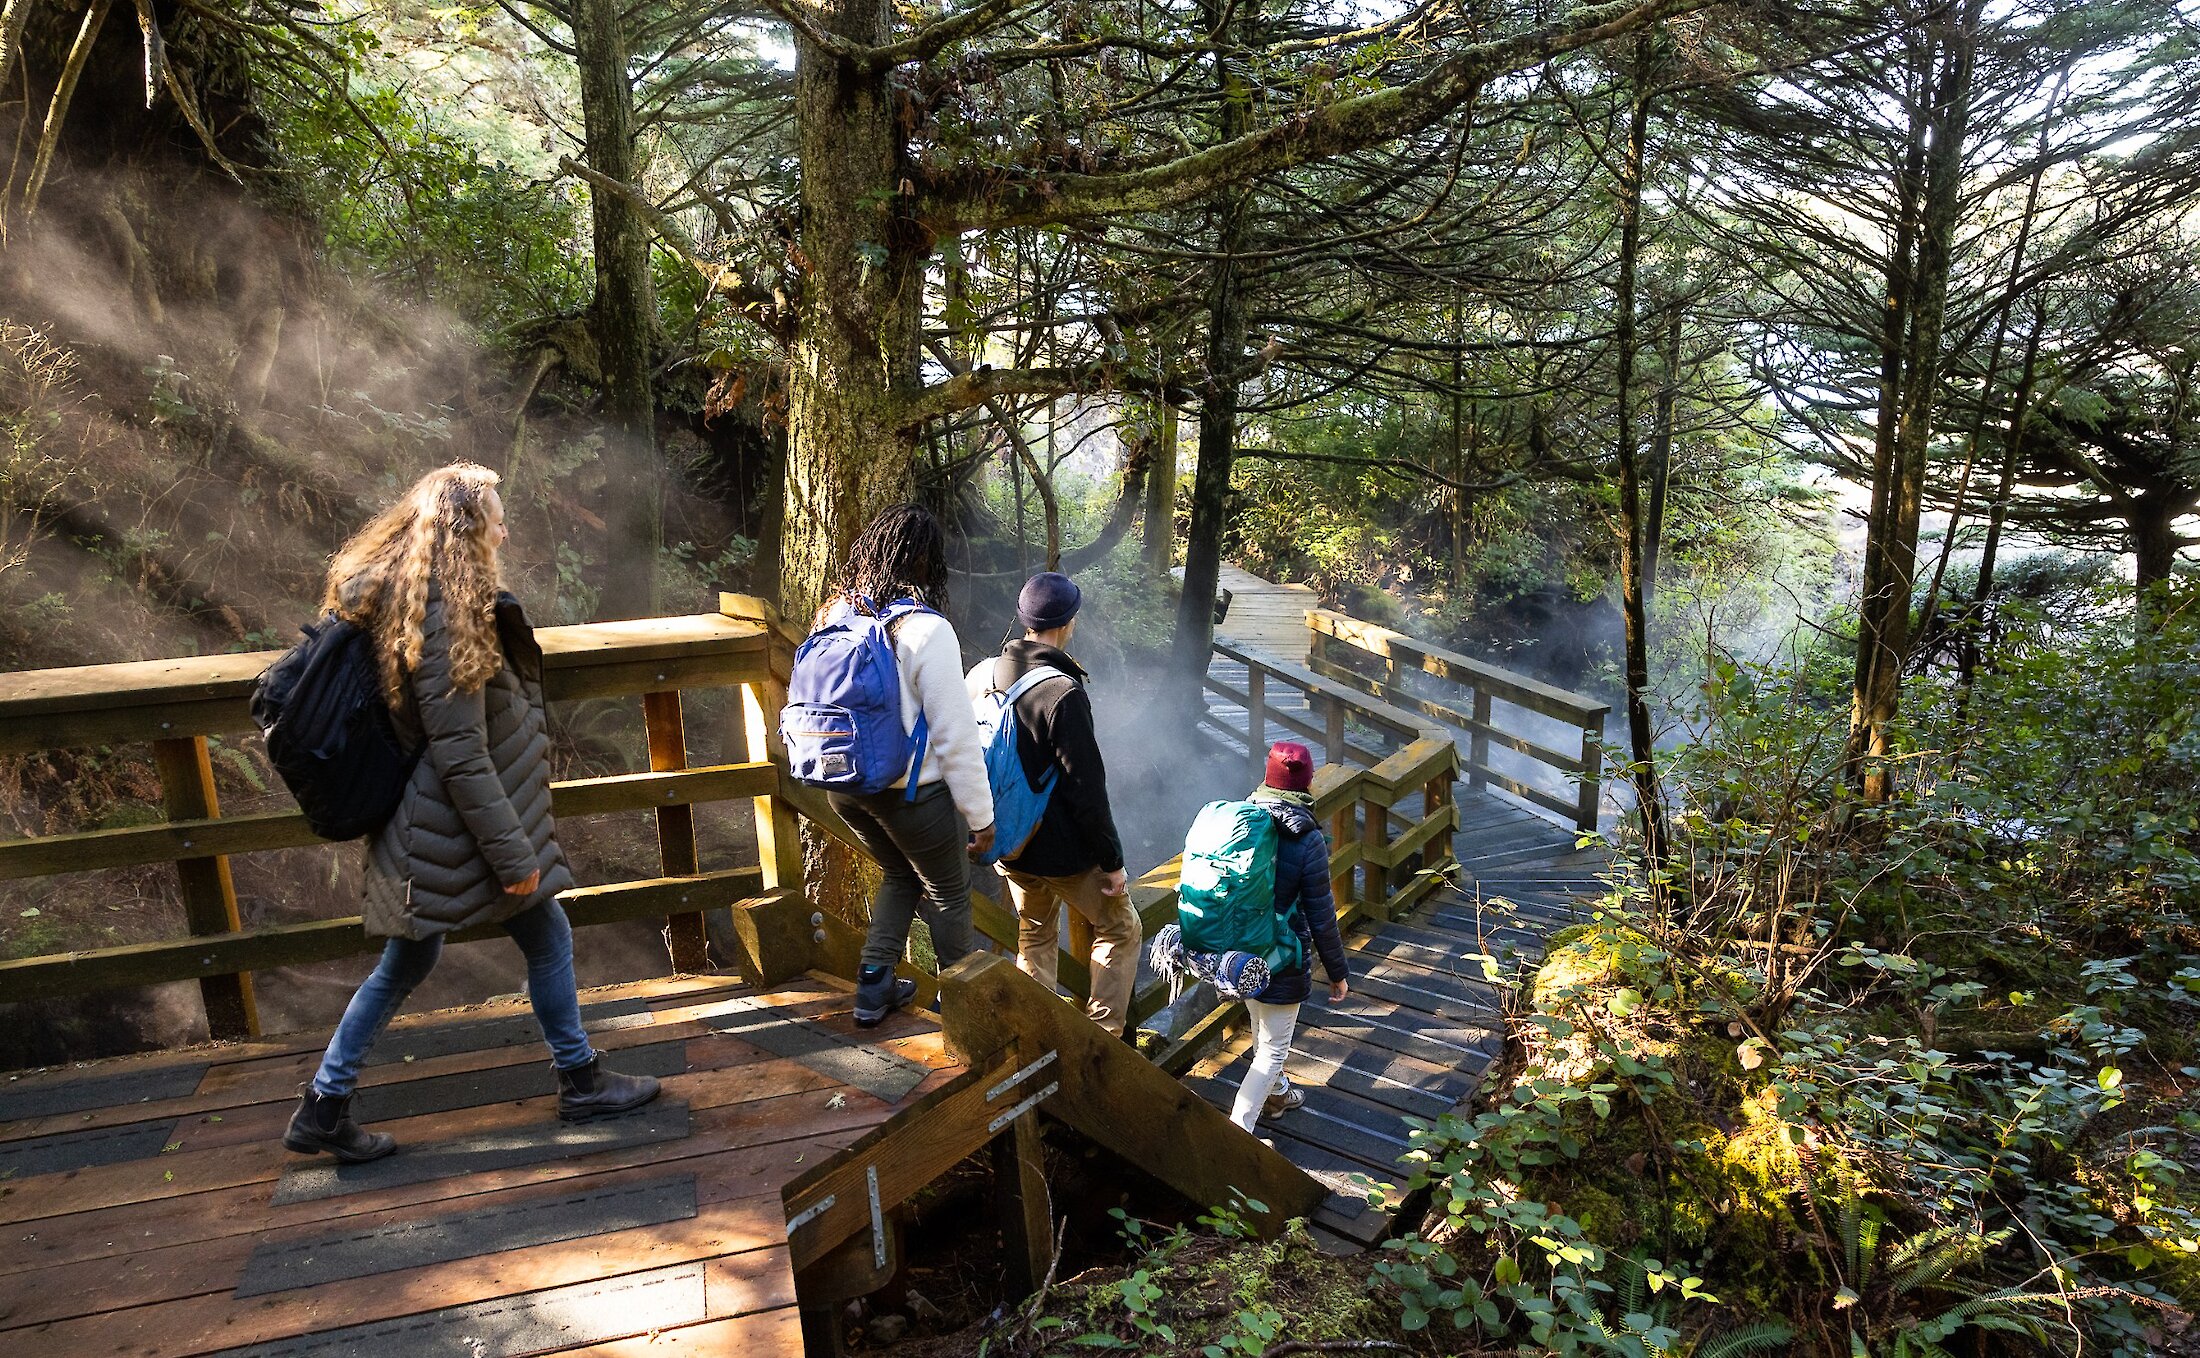 A group of people descending wooden stairs in the forest with steam rising as they arrive at Hot Springs Cove.